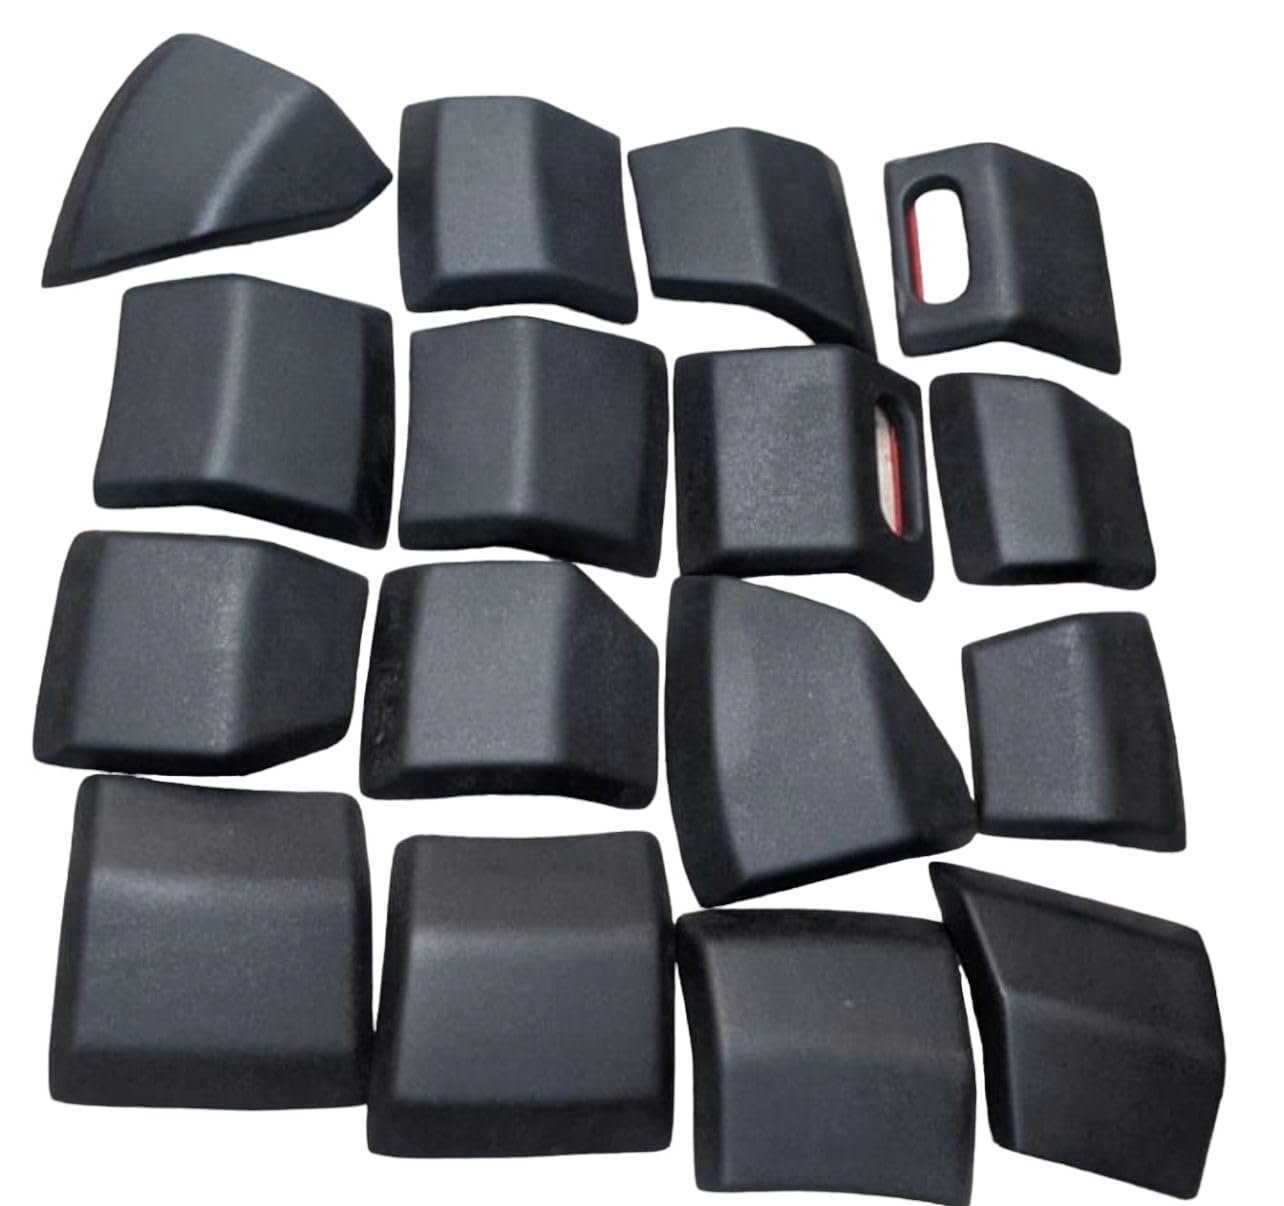 Wheel Arch Cladding Compatible For New Mahindra (Set of 16) ABS Plastic Cladding Thar (Black) Image 